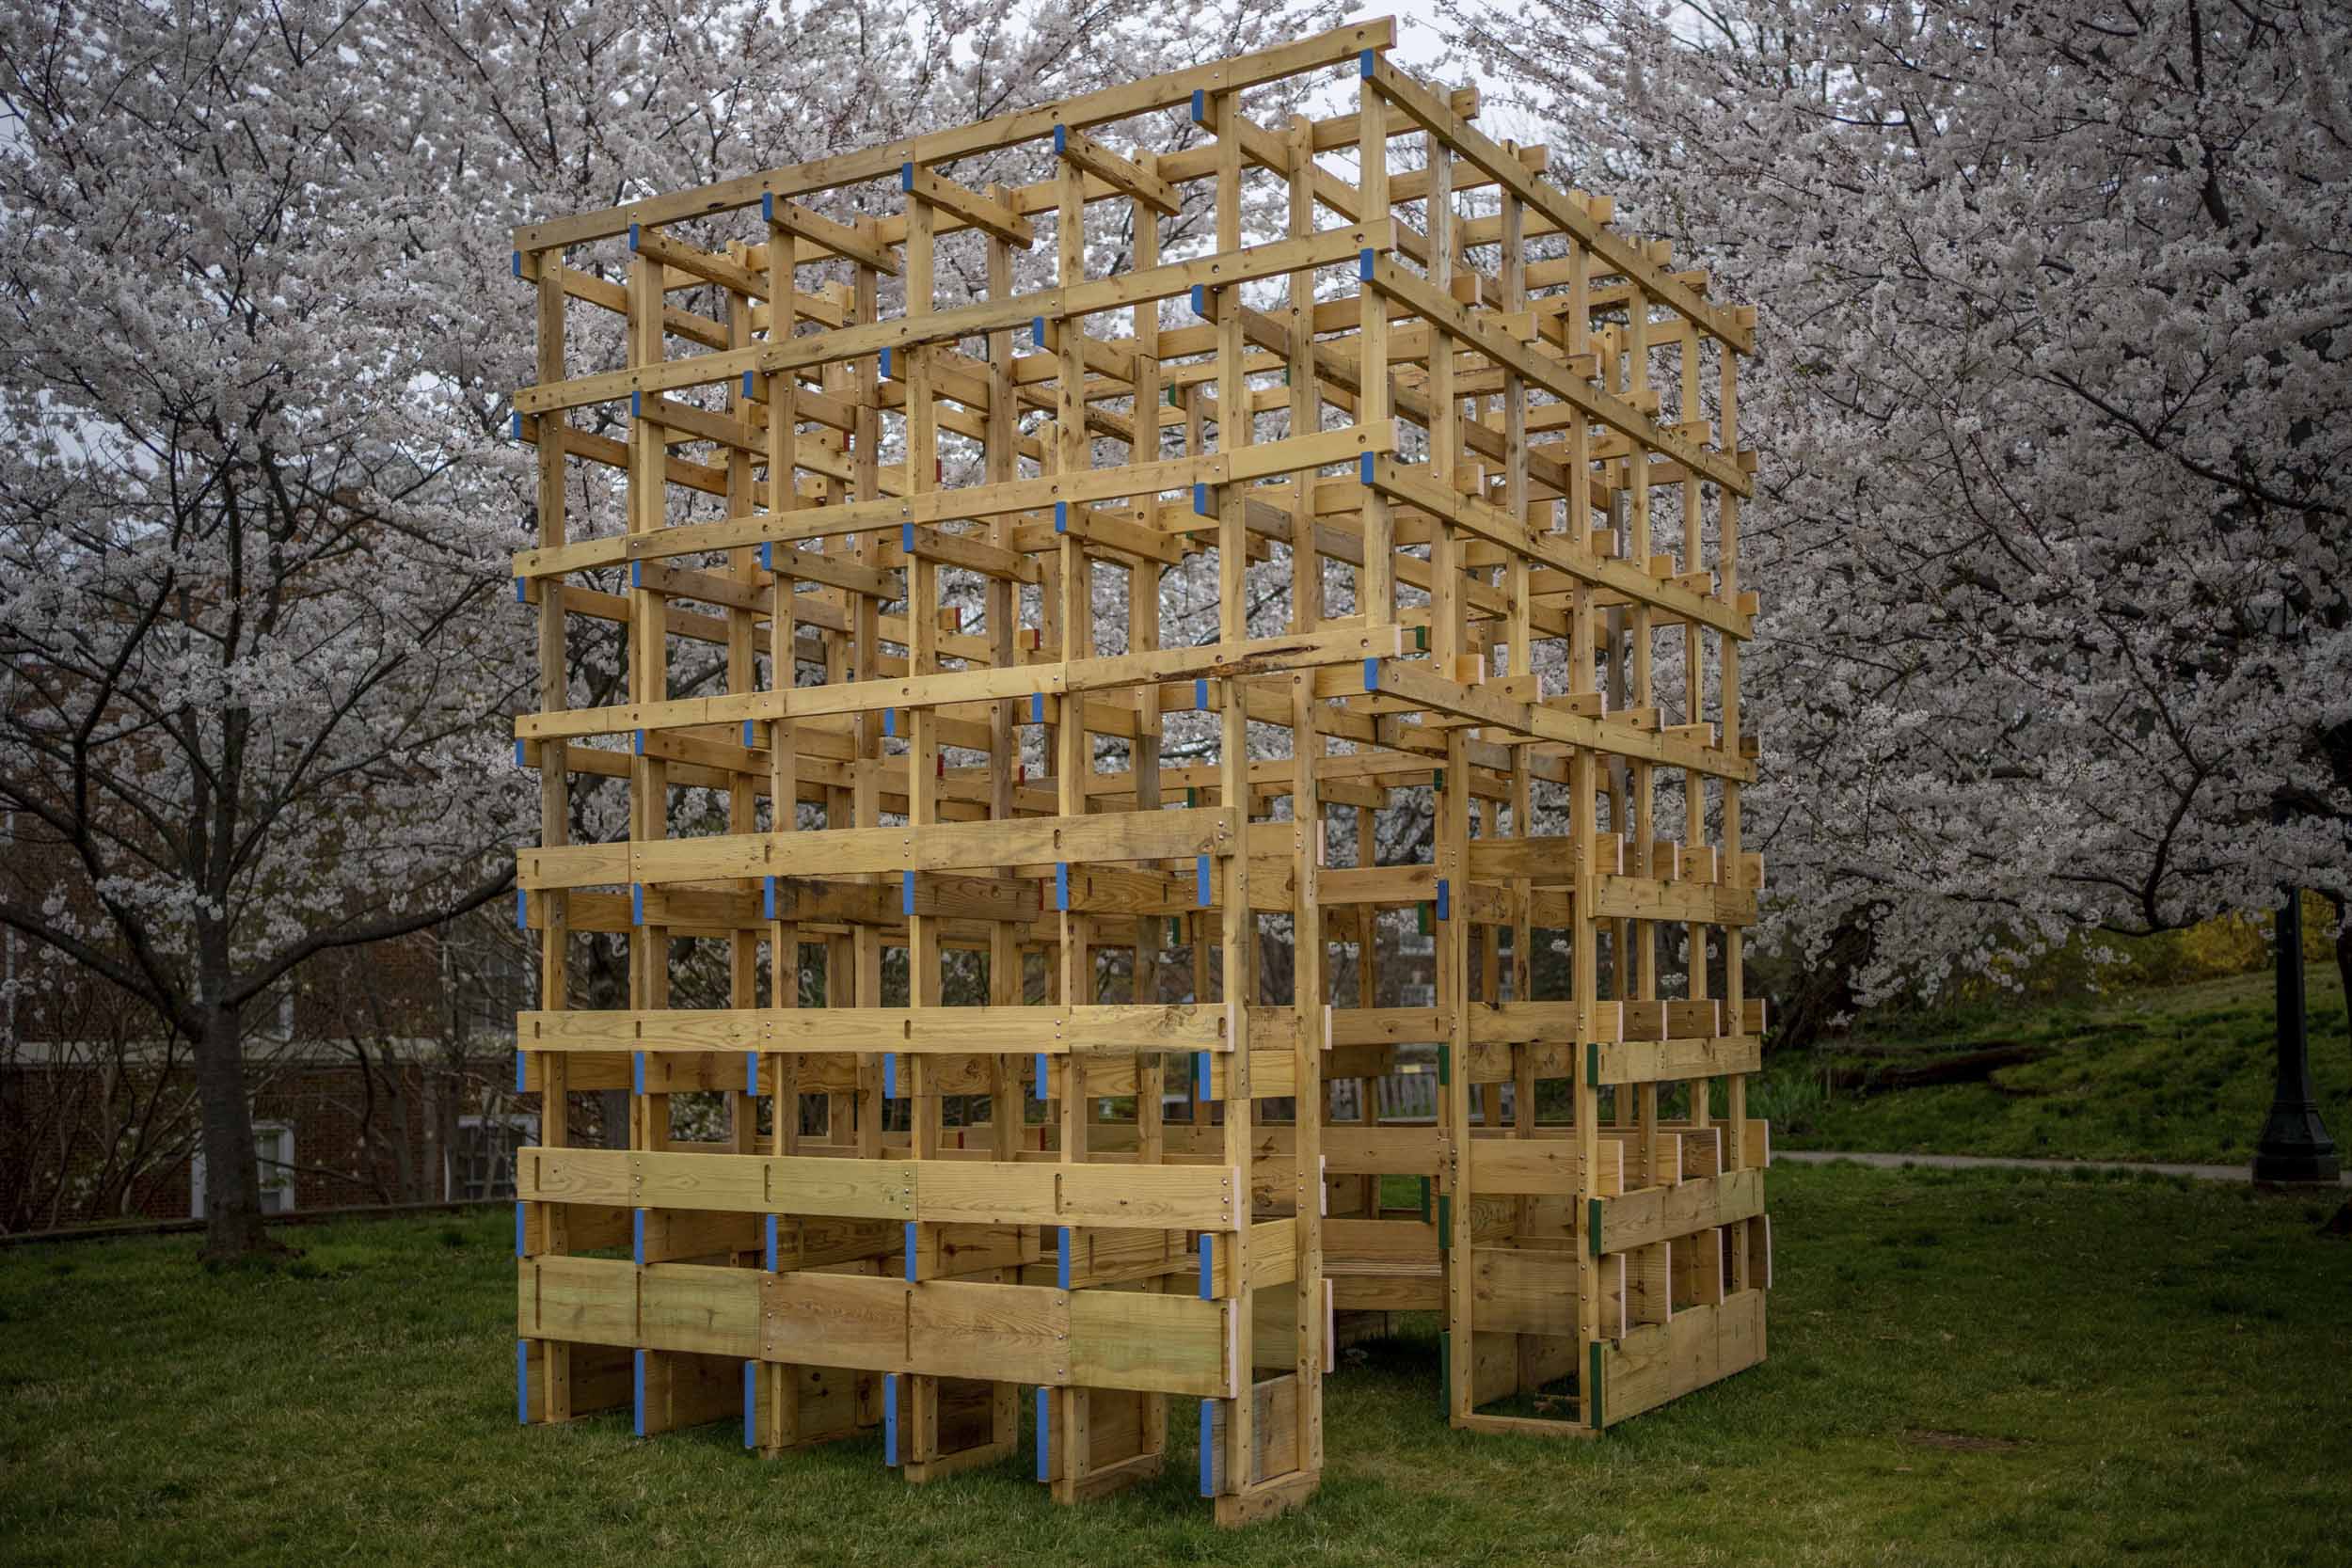 A 3-dimensional grid made of lumber under blooming Bradford Pear trees